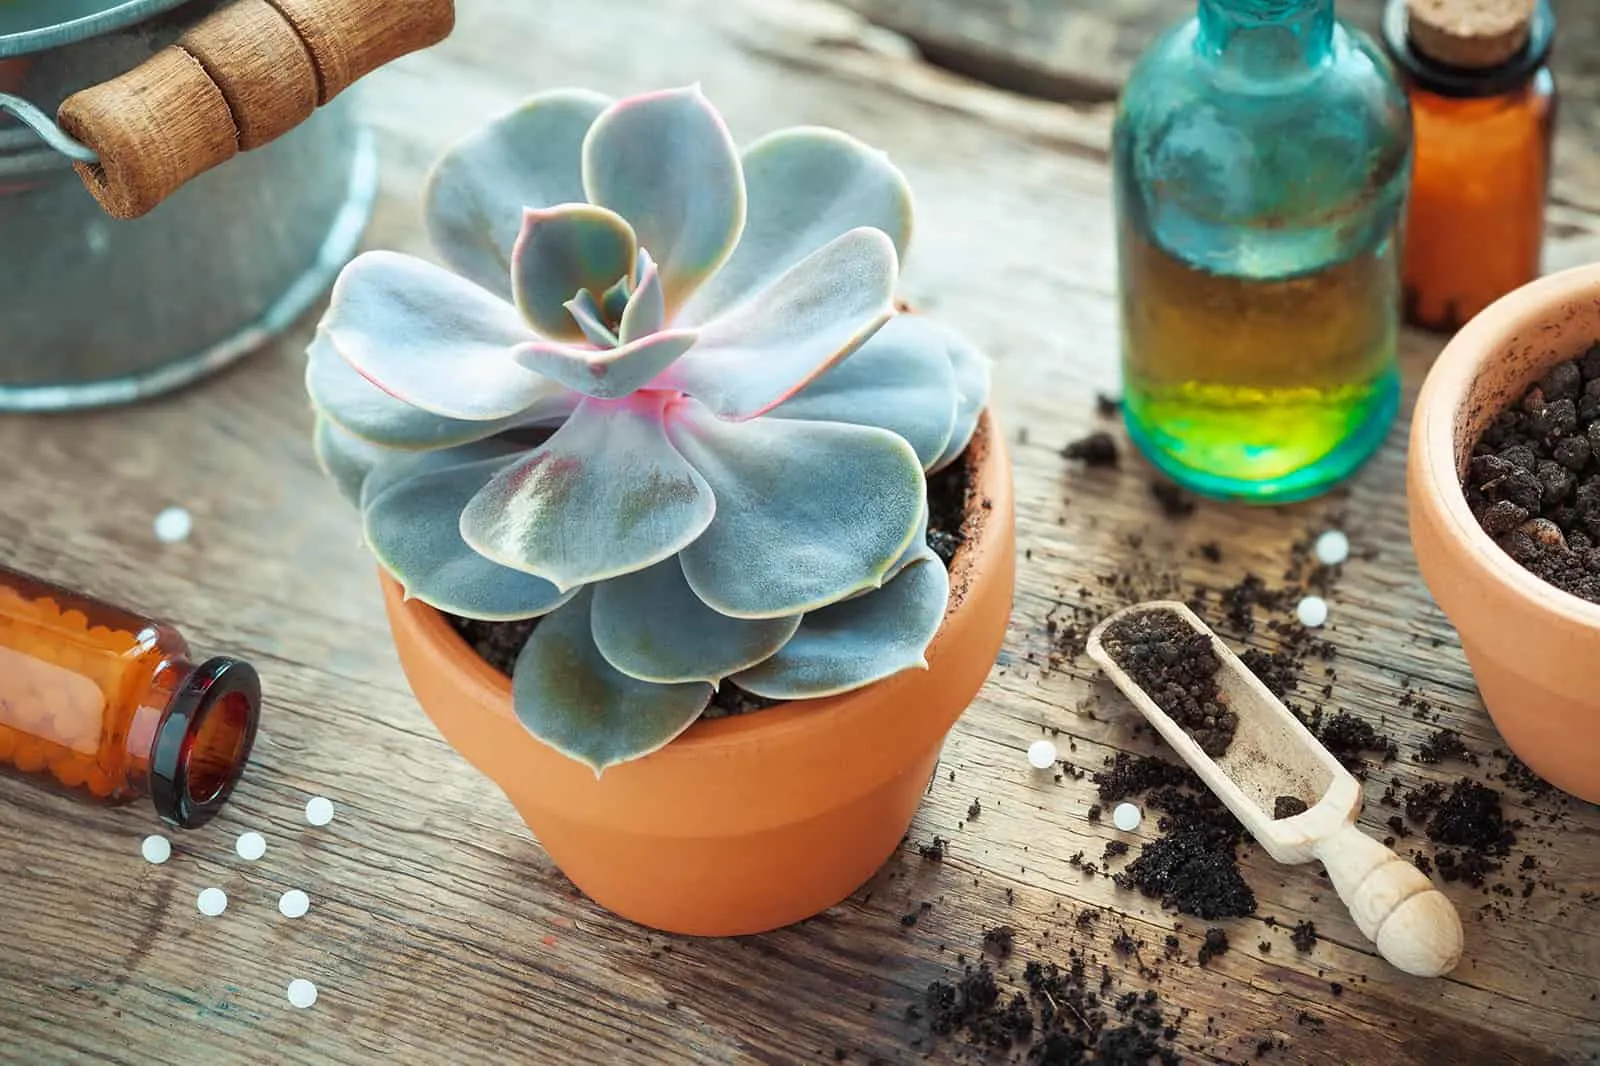 echeveria in flower pot and a spoon with soil on table